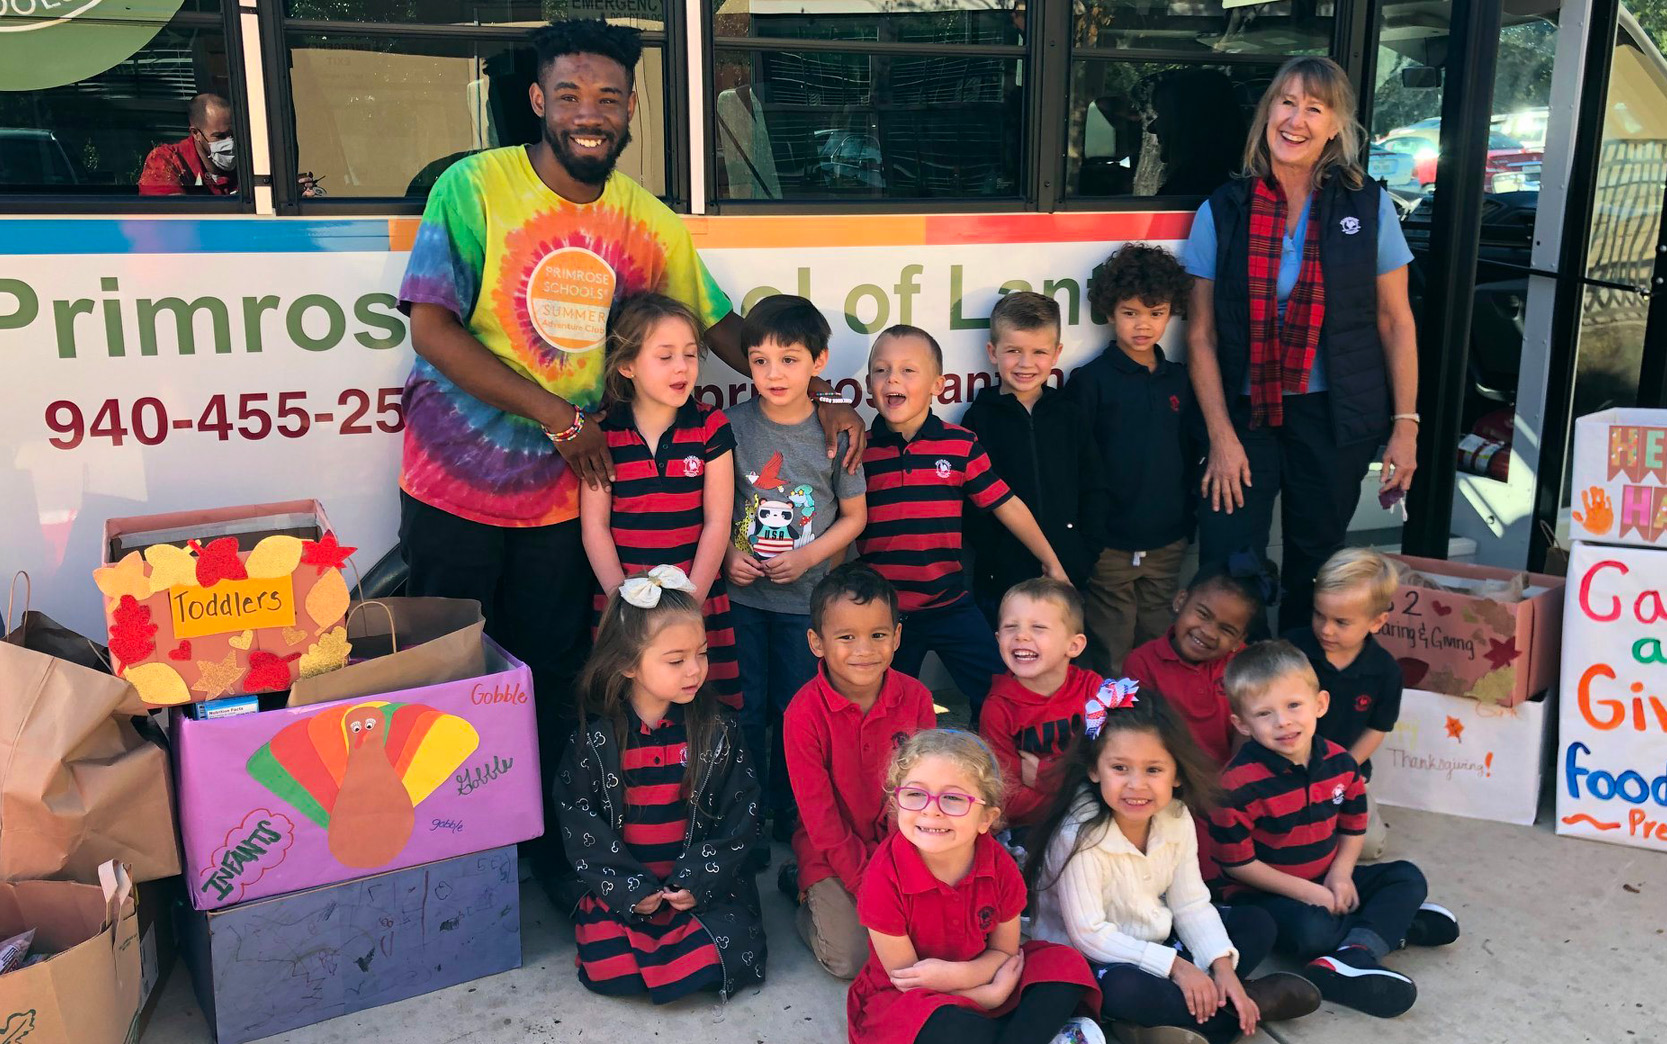 A class at Primrose School of Lantana (Lantana, TX) prepares to deliver canned goods as part of the Caring and Giving Food drive.